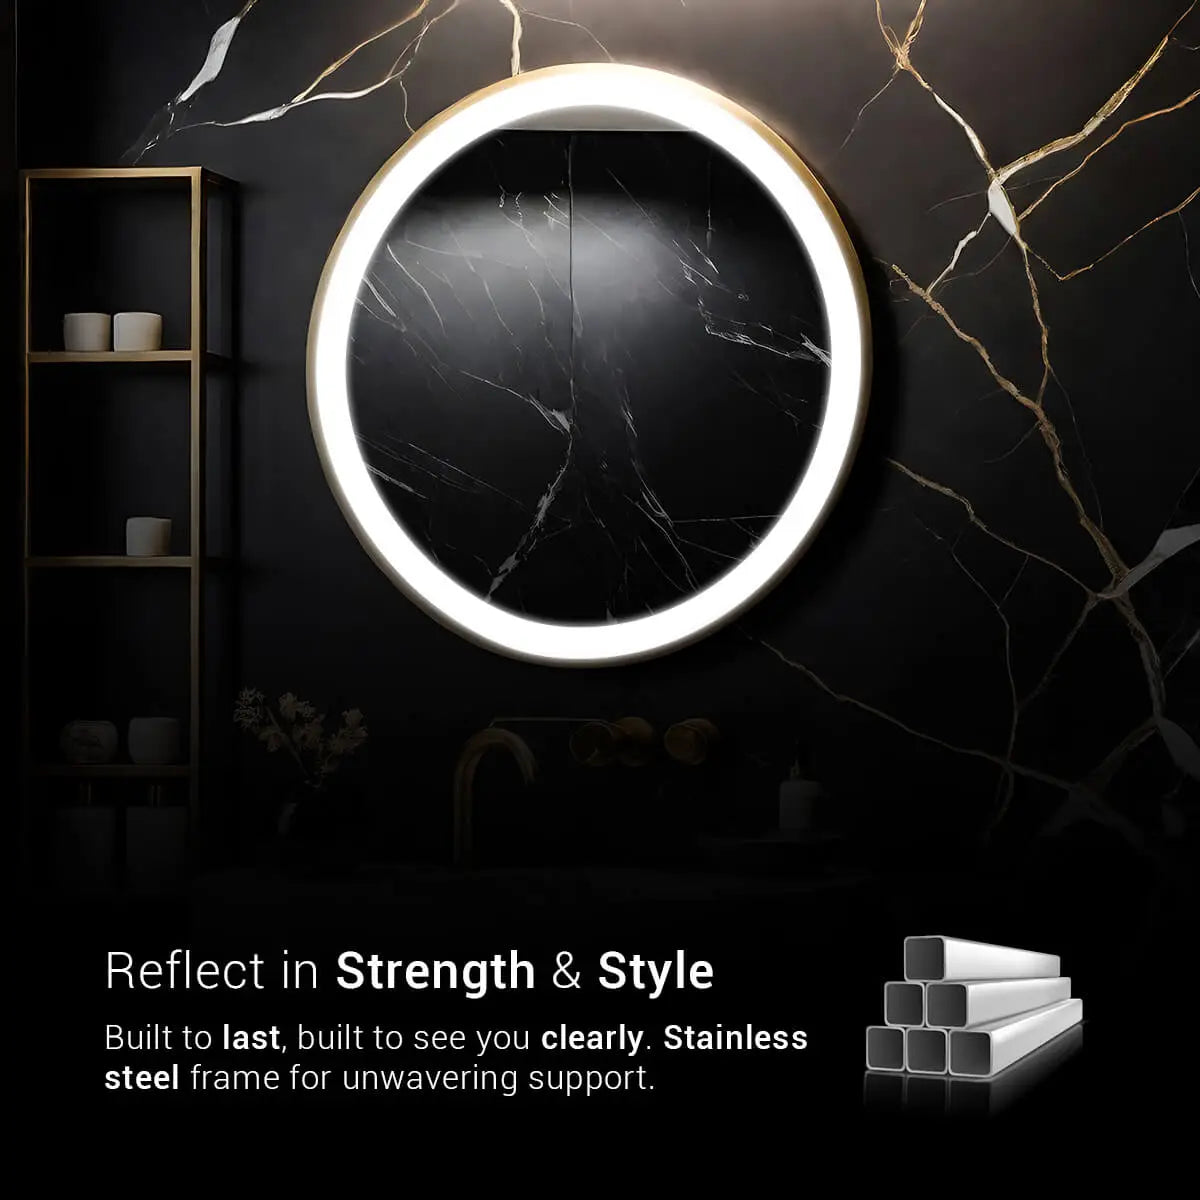 Modern gold stainless steel framed round LED mirror with a built-in bright white LED light. This mirror is perfect for shaving, applying makeup, or styling your hair. Text overlay says "Reflect in Strength & Style. Built to last, built to see you clearly. Stainless steel frame for unwavering support."